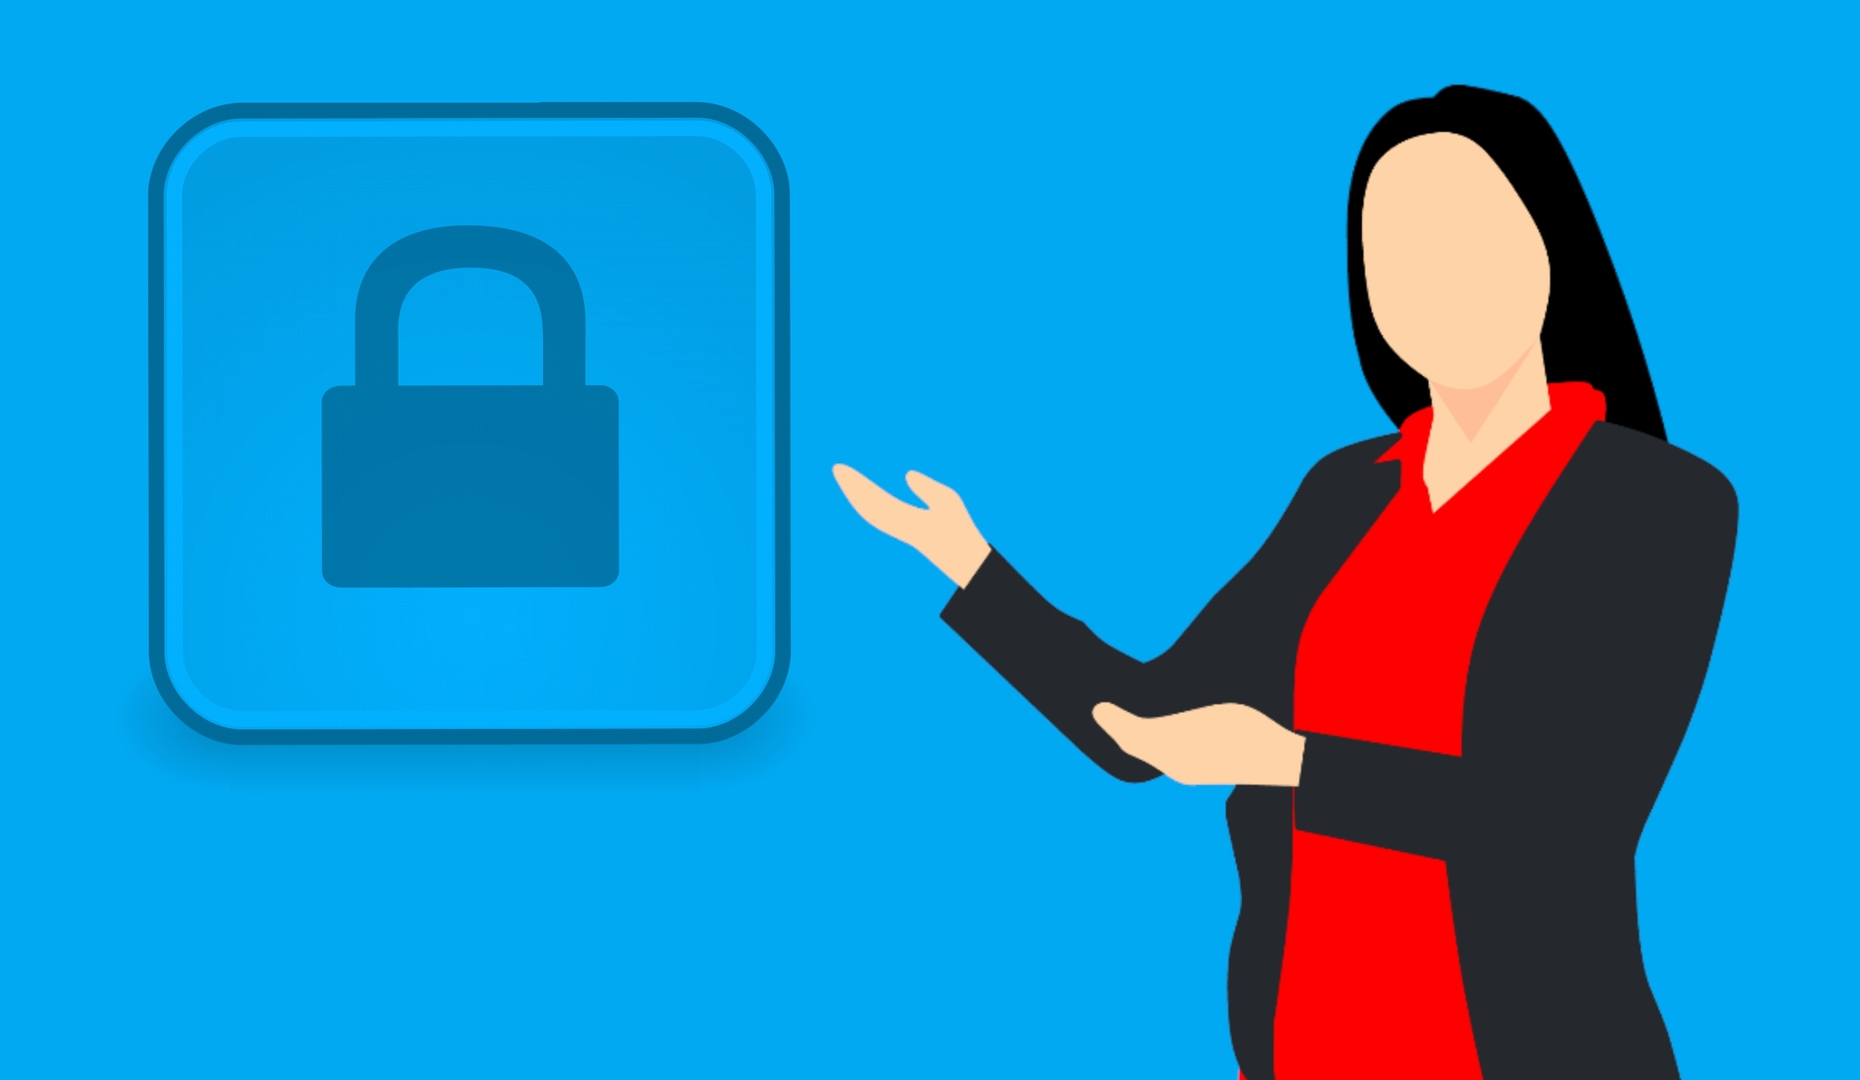 Illustration of a woman pointing hands towards a padlock